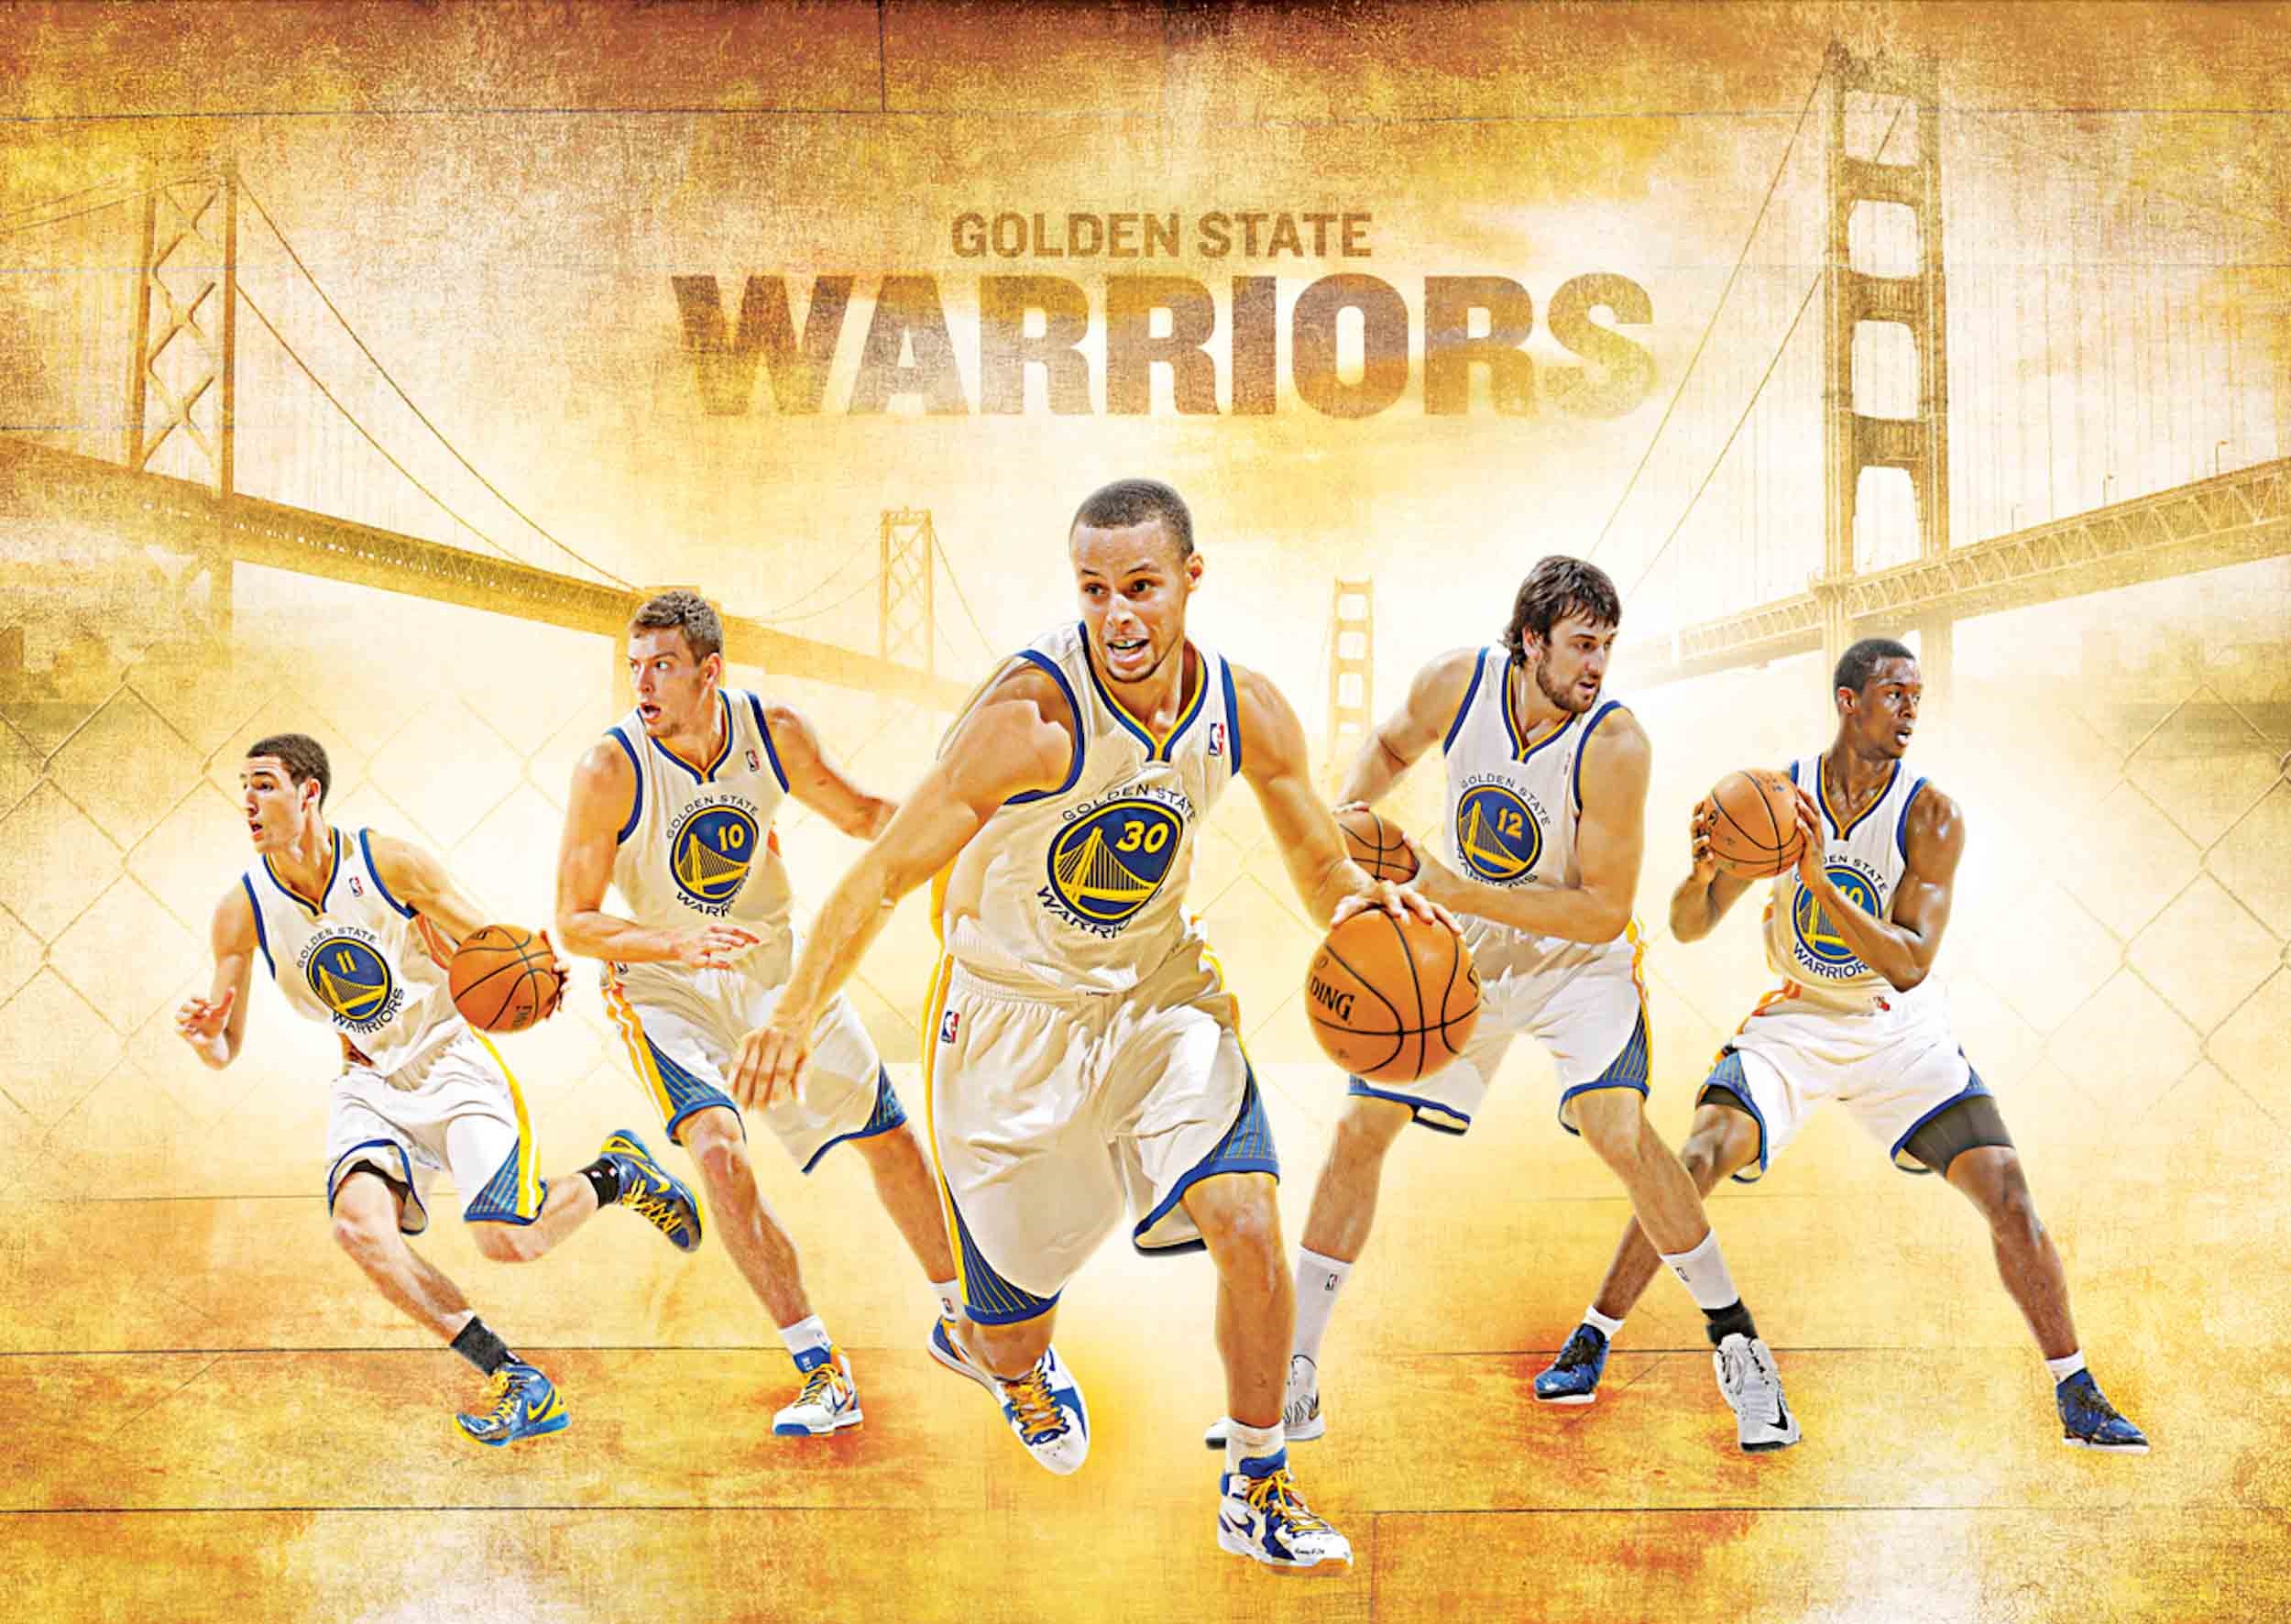 NBA 2020 Draft for the Golden State Warriors: Stephen Curry, Klay Thompson, D'Angelo ...2500 x 1772